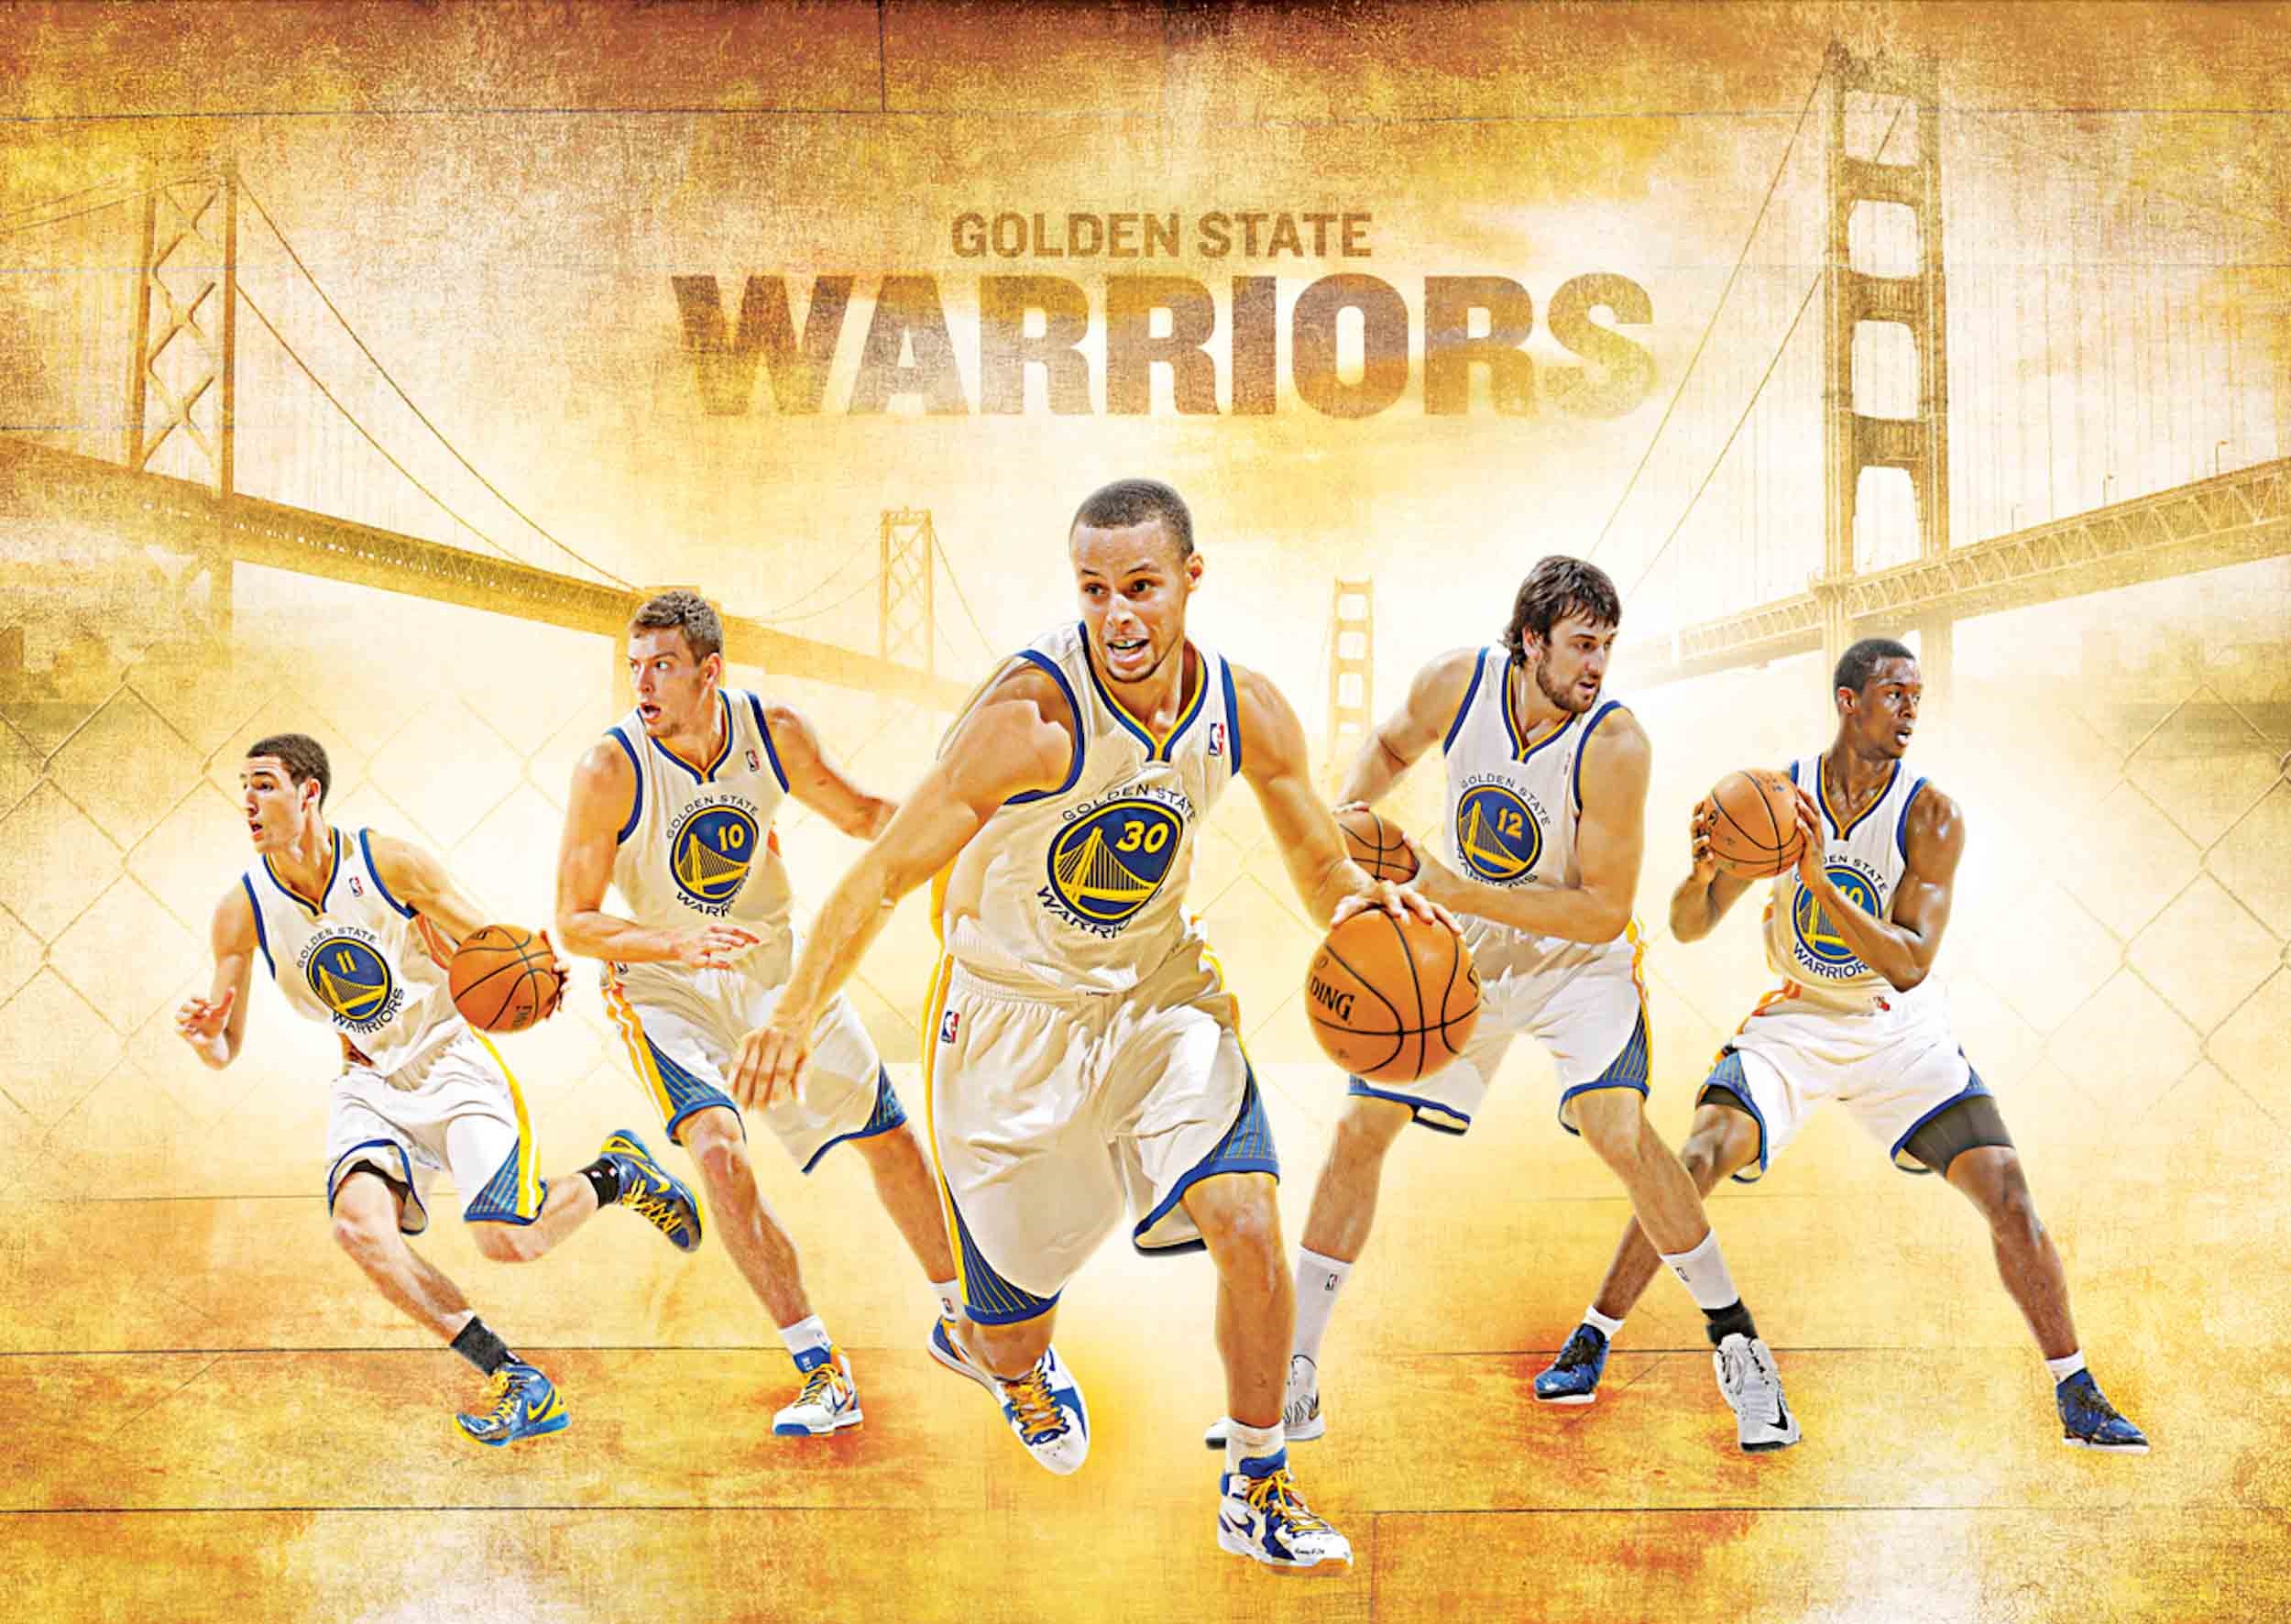 NBA 2020 Draft for the Golden State Warriors: Stephen Curry, Klay Thompson, D'Angelo ...2500 x 1772